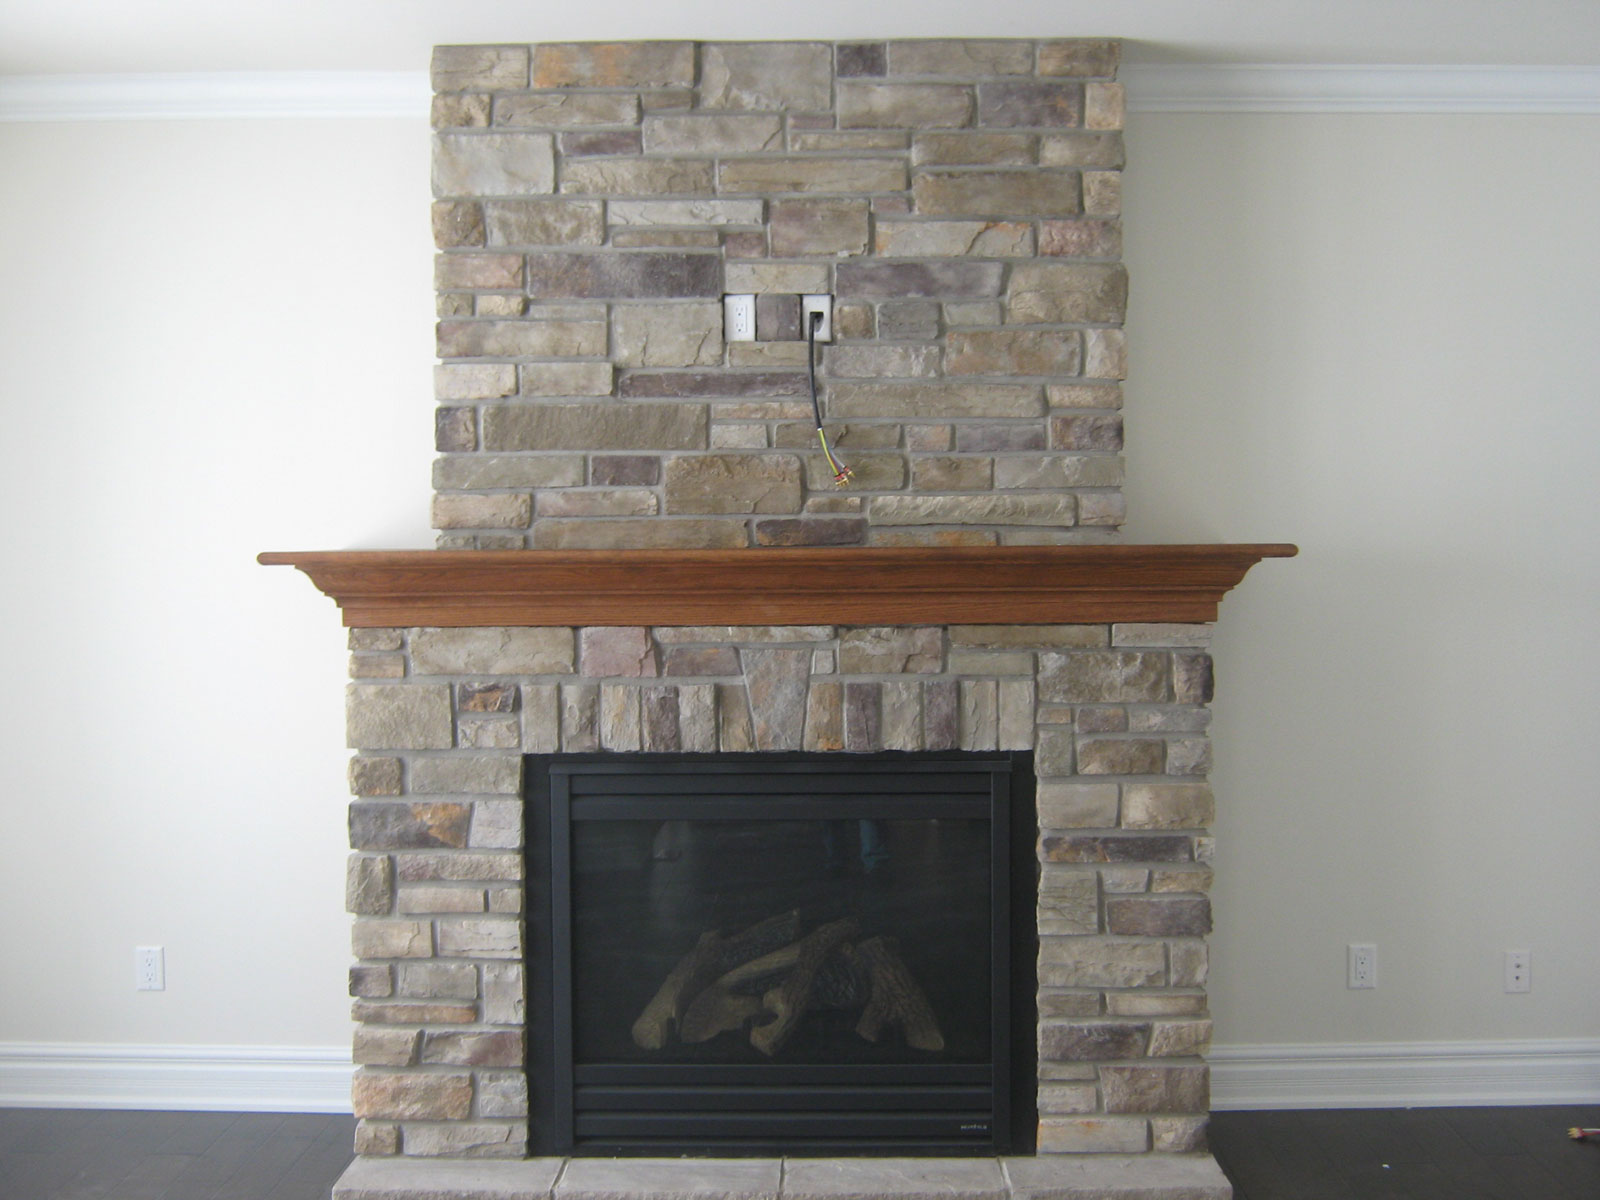 Stone Fireplace Country Custom Stone Fireplace Design In Country Ledge Stone Living Room With Wooden Mantel Ideas Living Room  Stone Fireplace Design Providing Warmth For Living Room 